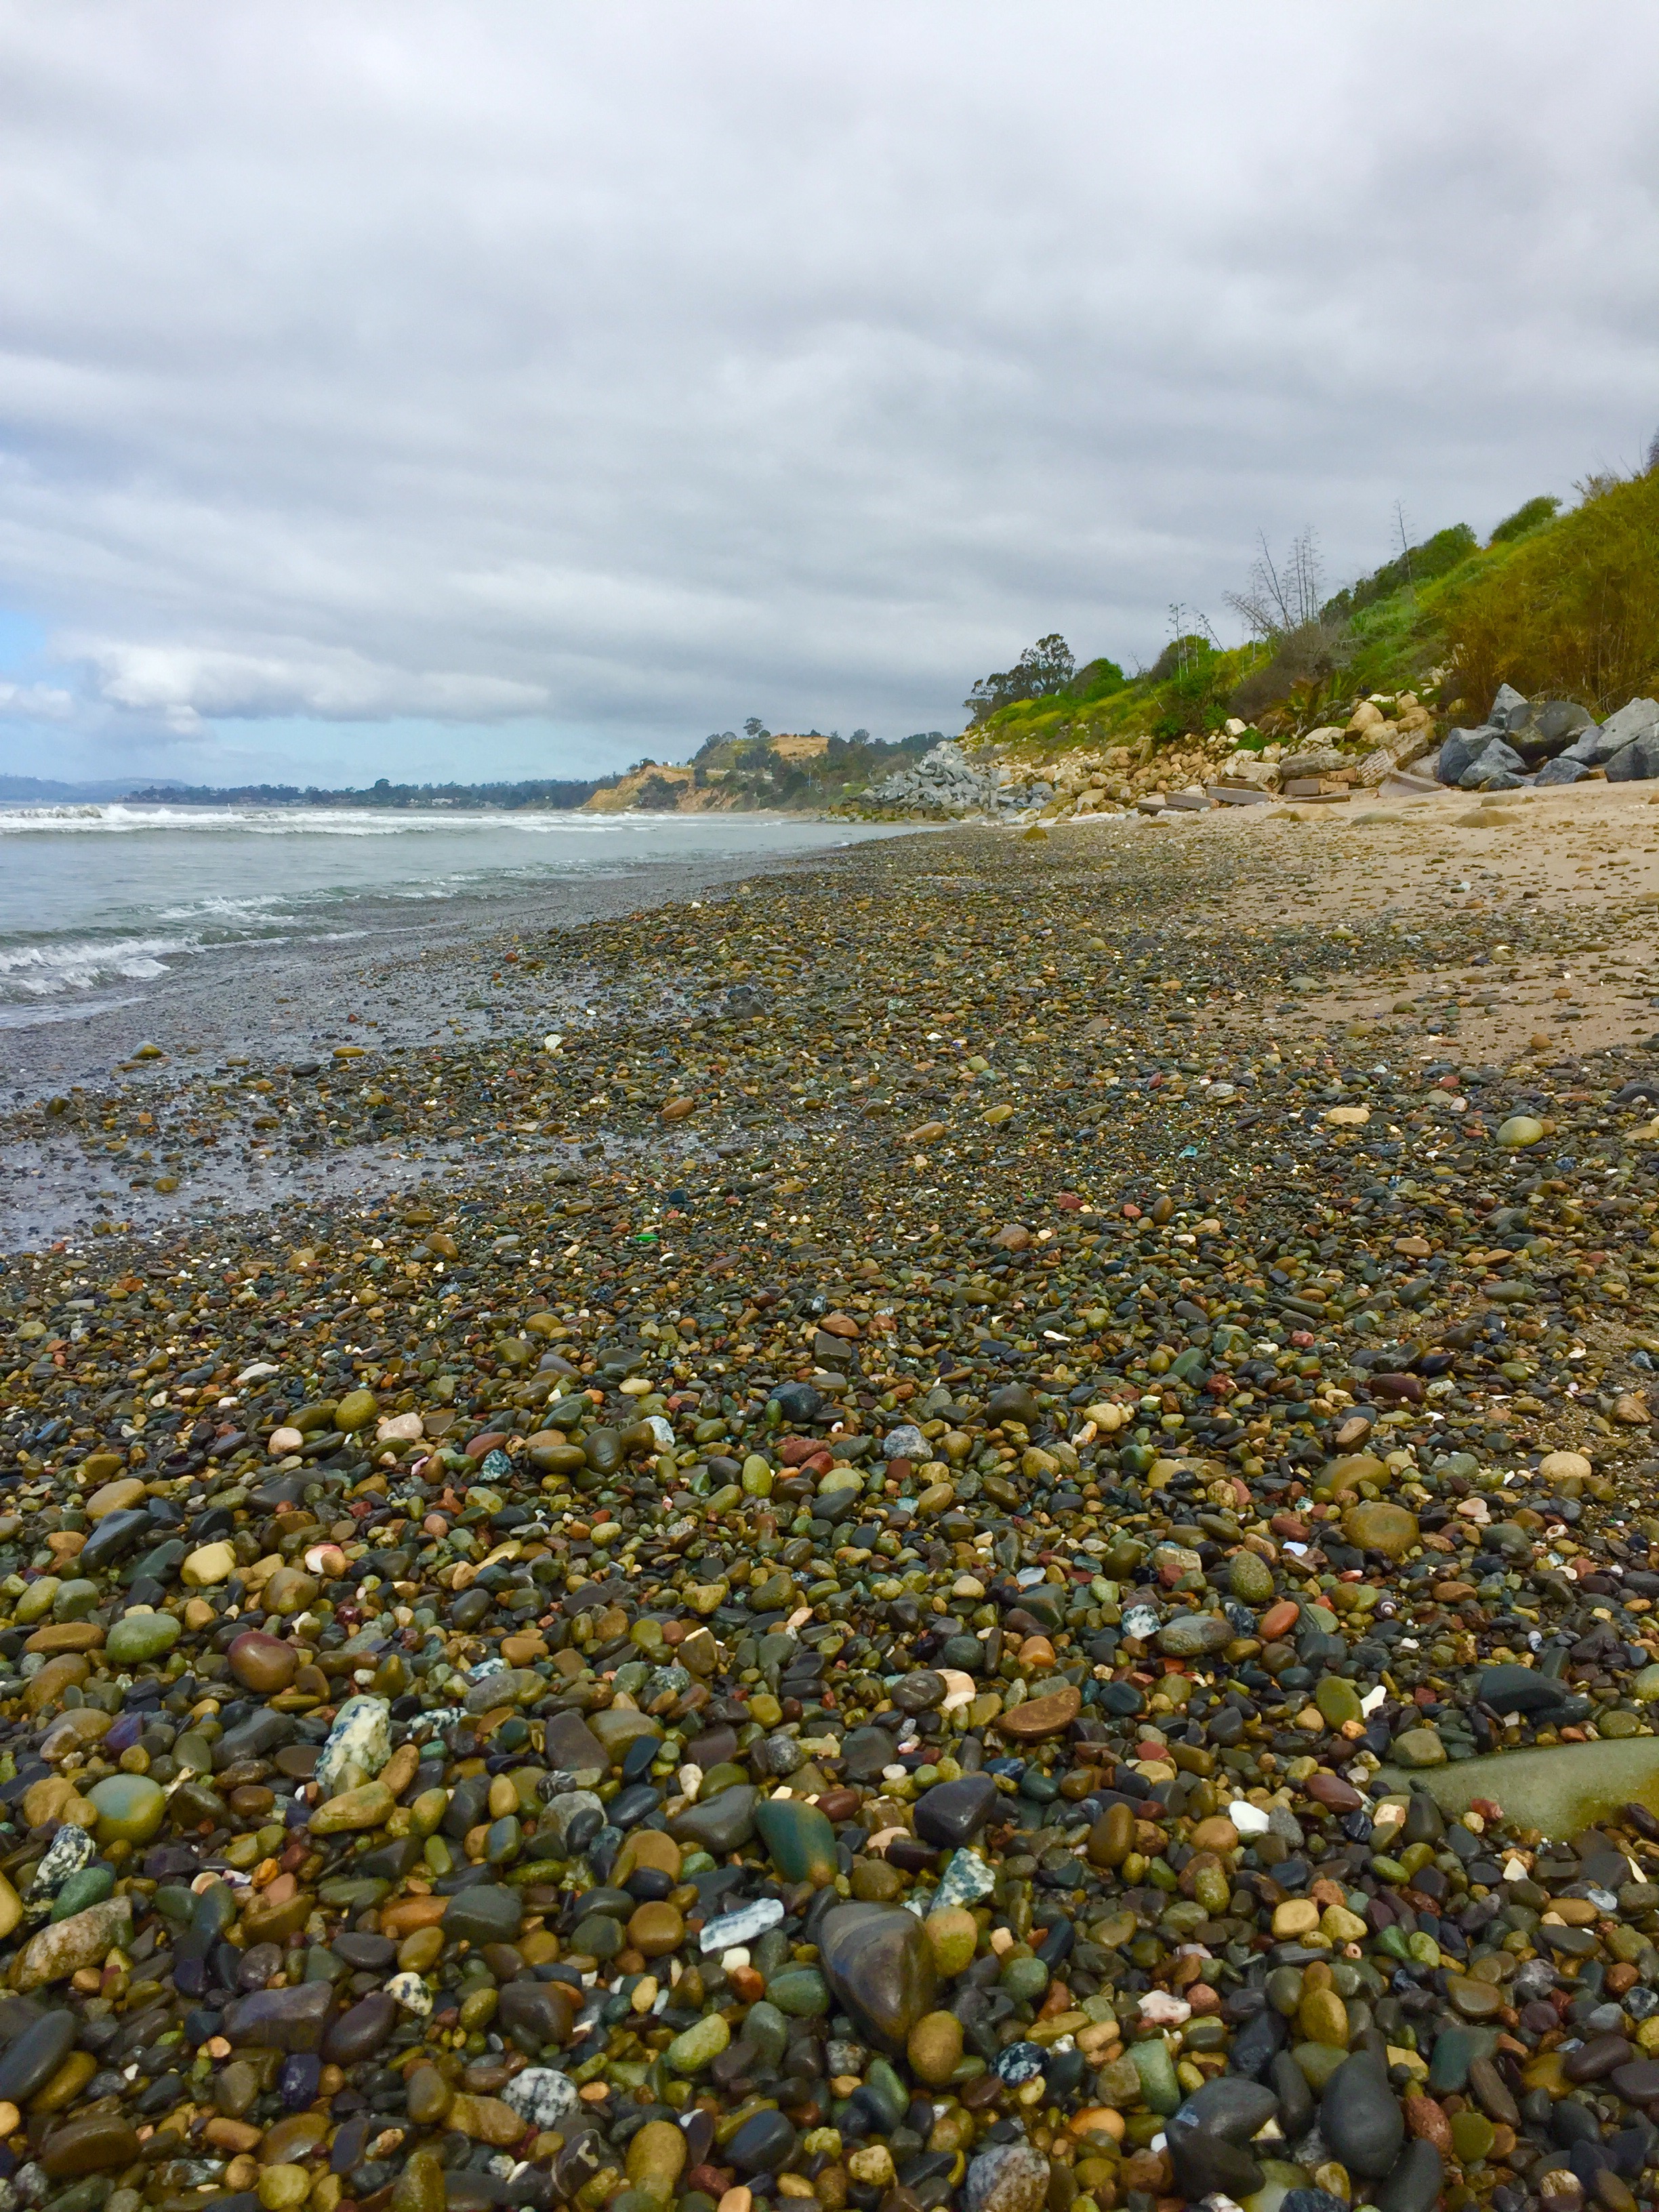 Life in the Slow Lane (The Pearl): Sea Glass & Glass Beaches